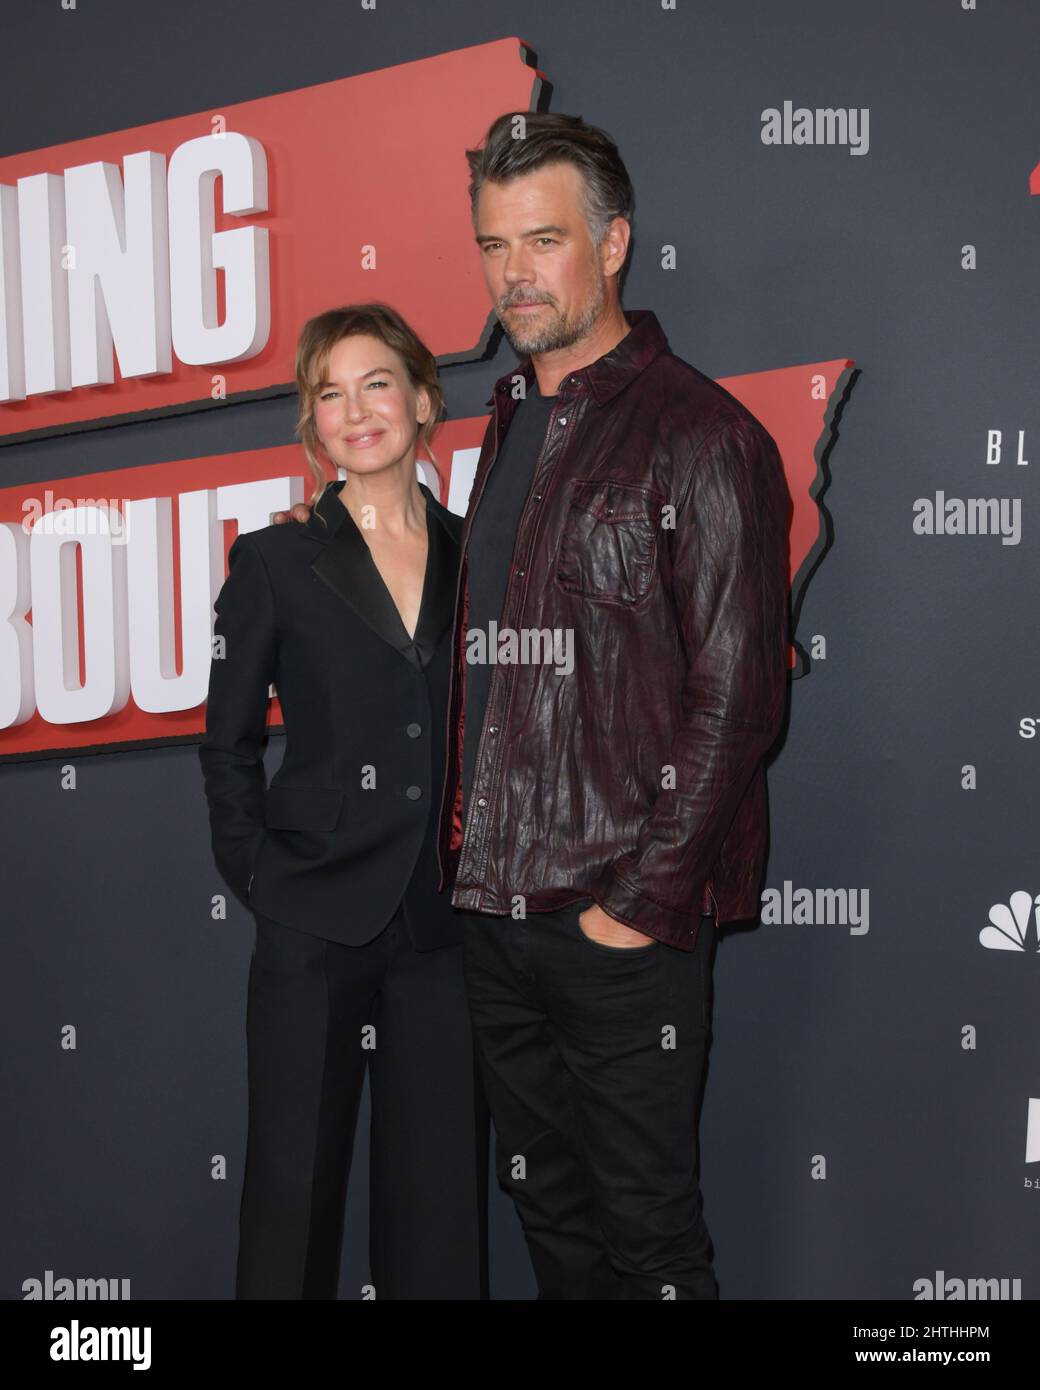 February 28 22 Los Angeles California Usa Renee Zellweger L And Josh Duhamel At A The Thing About Pama Premiere Red Carpet Event At The Maybourne Hotel In Los Angeles California Credit Image C